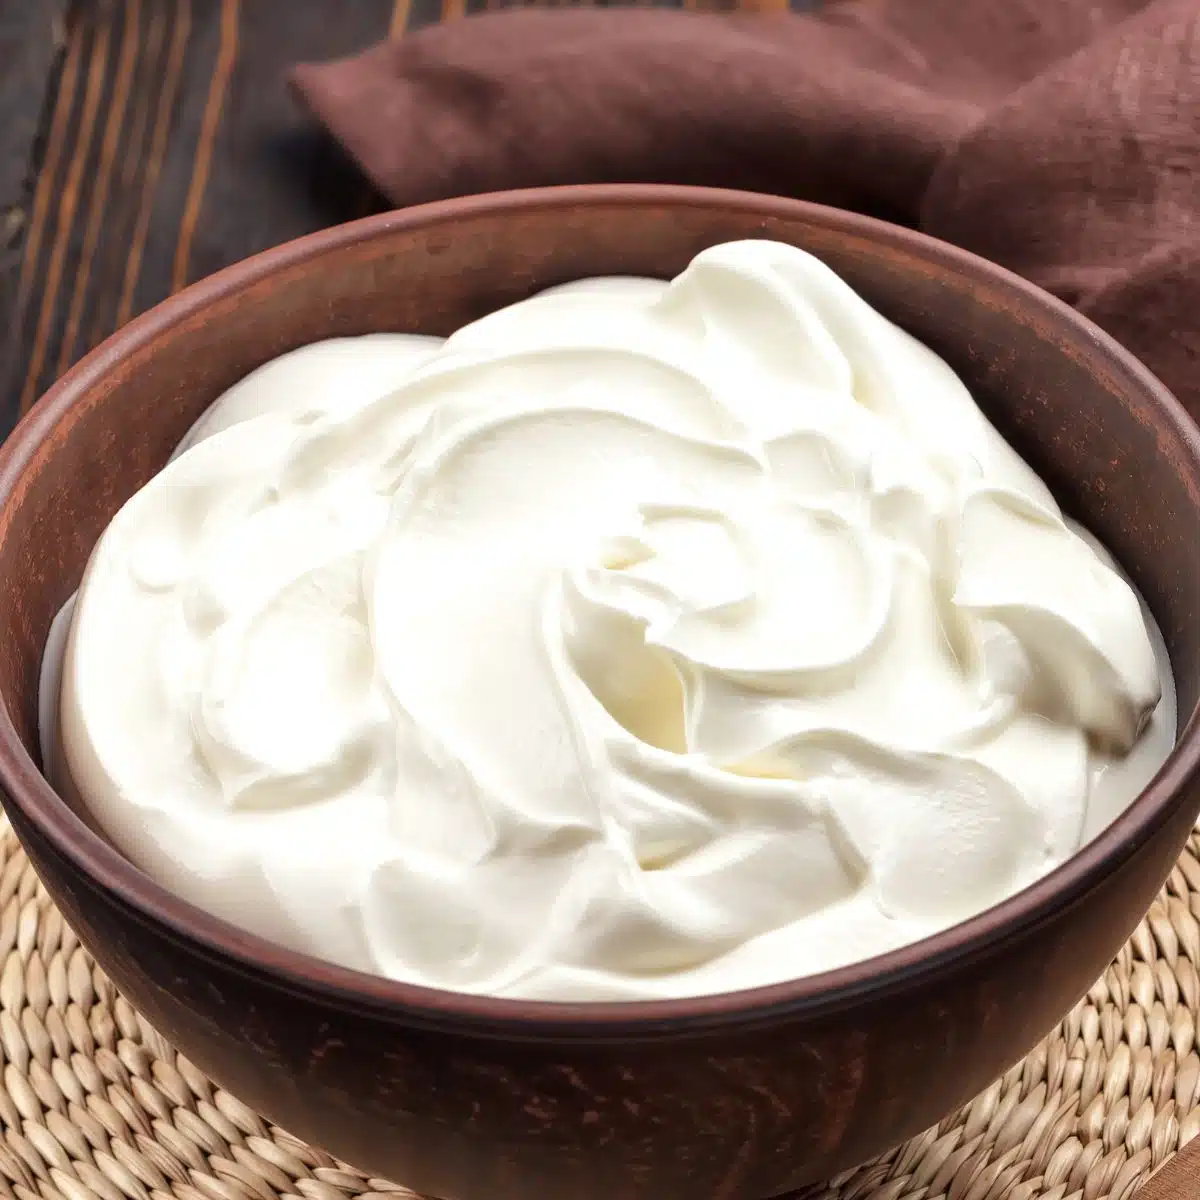 Square image showing sour cream in a wood bowl.